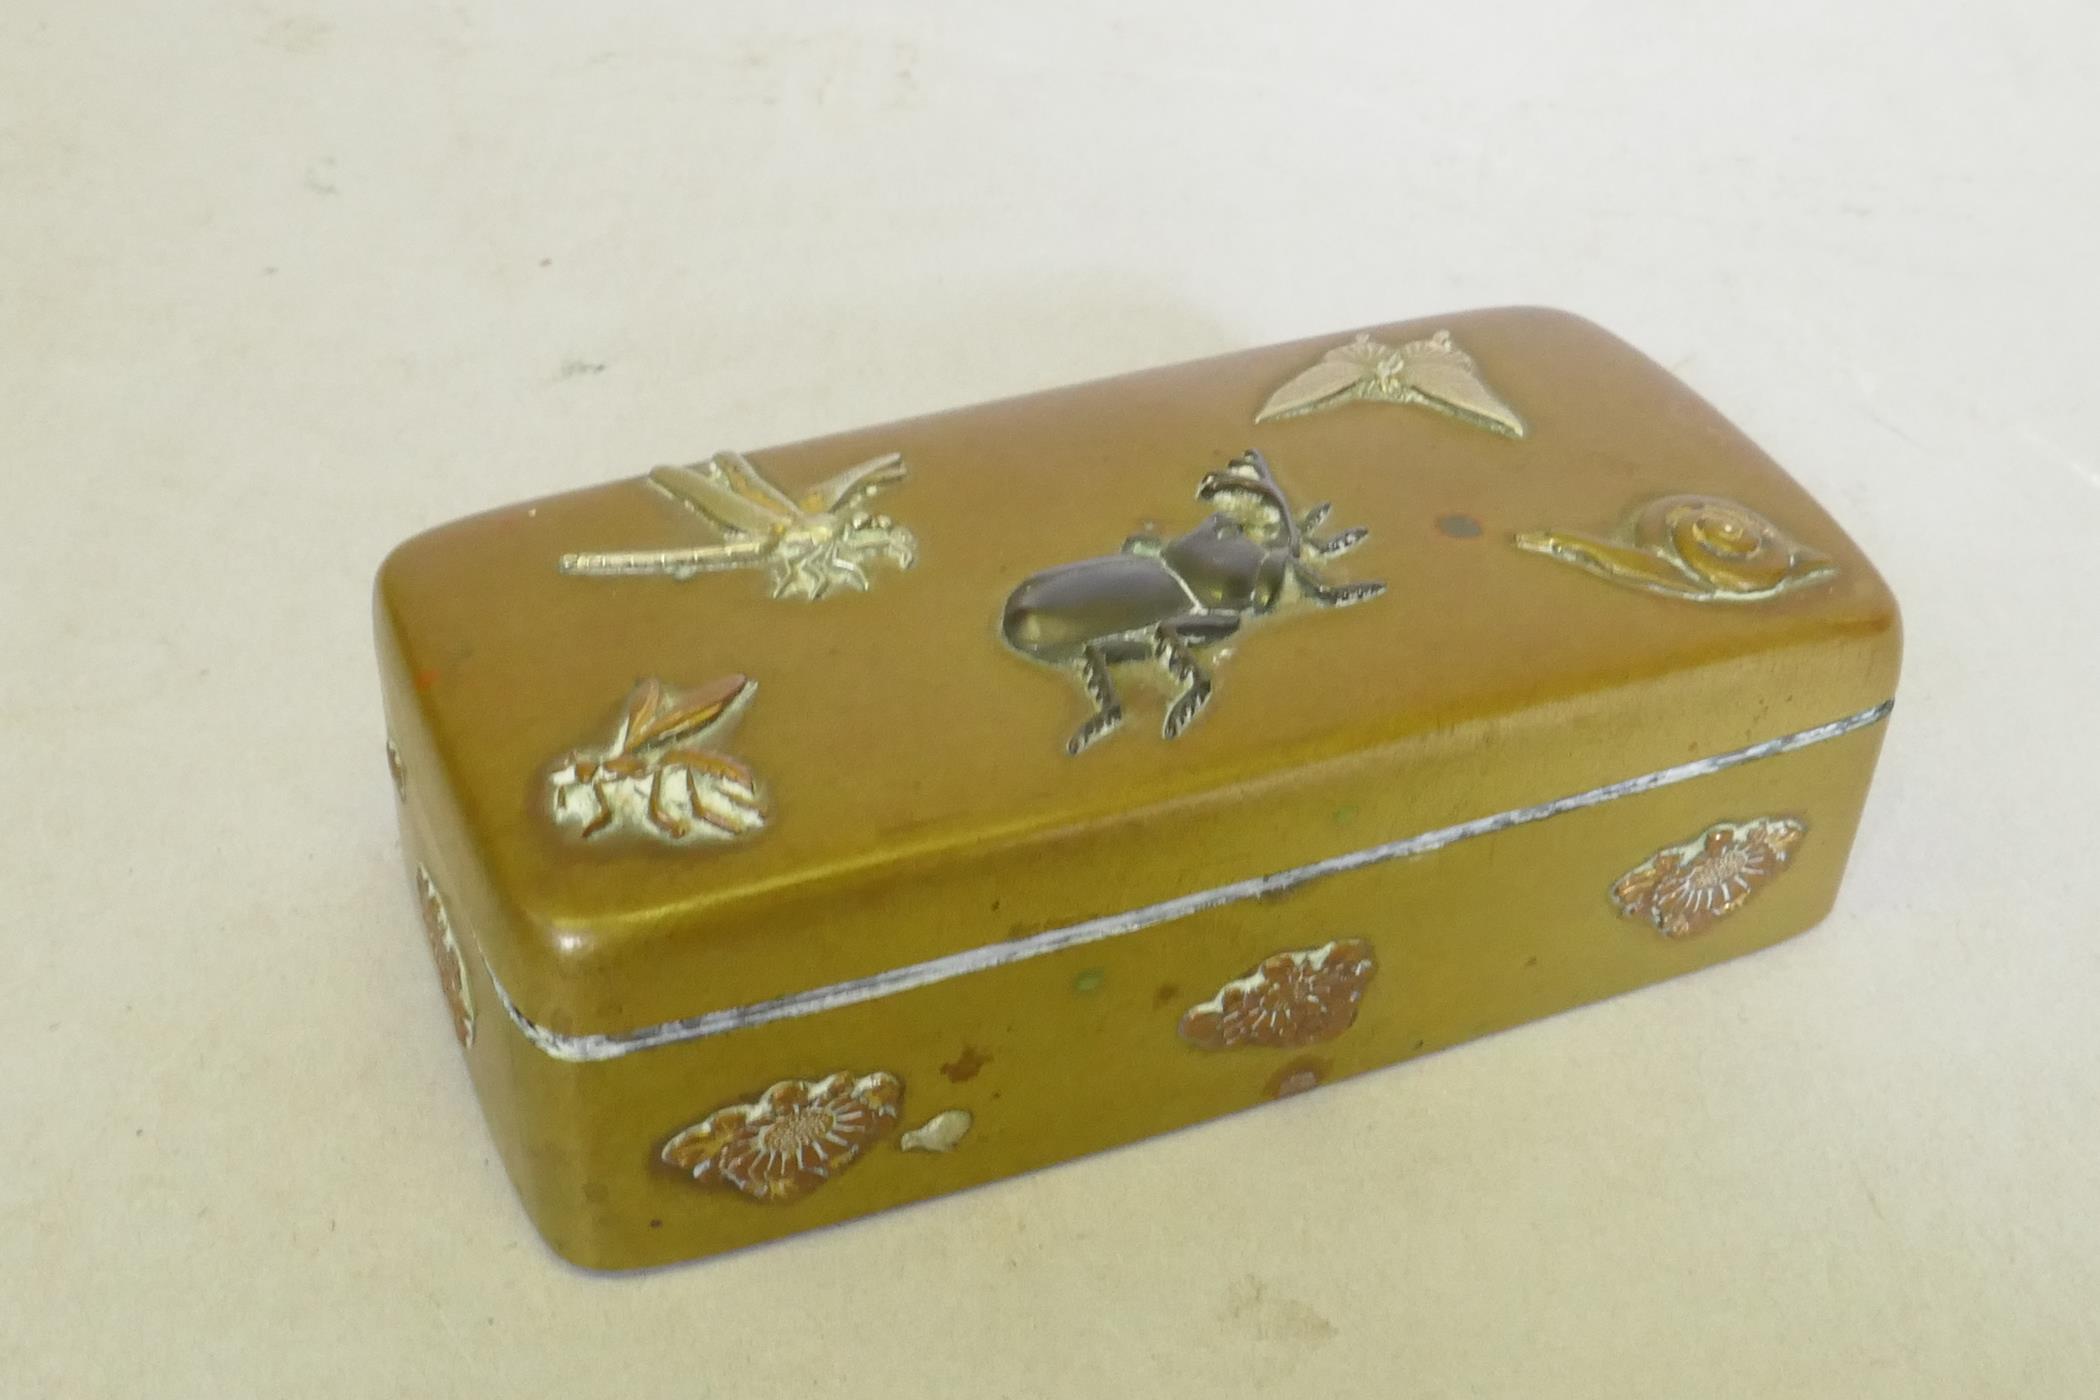 A Japanese Meiji period brass stamp box with raised multi-metal decoration of beetles, dragonfly and